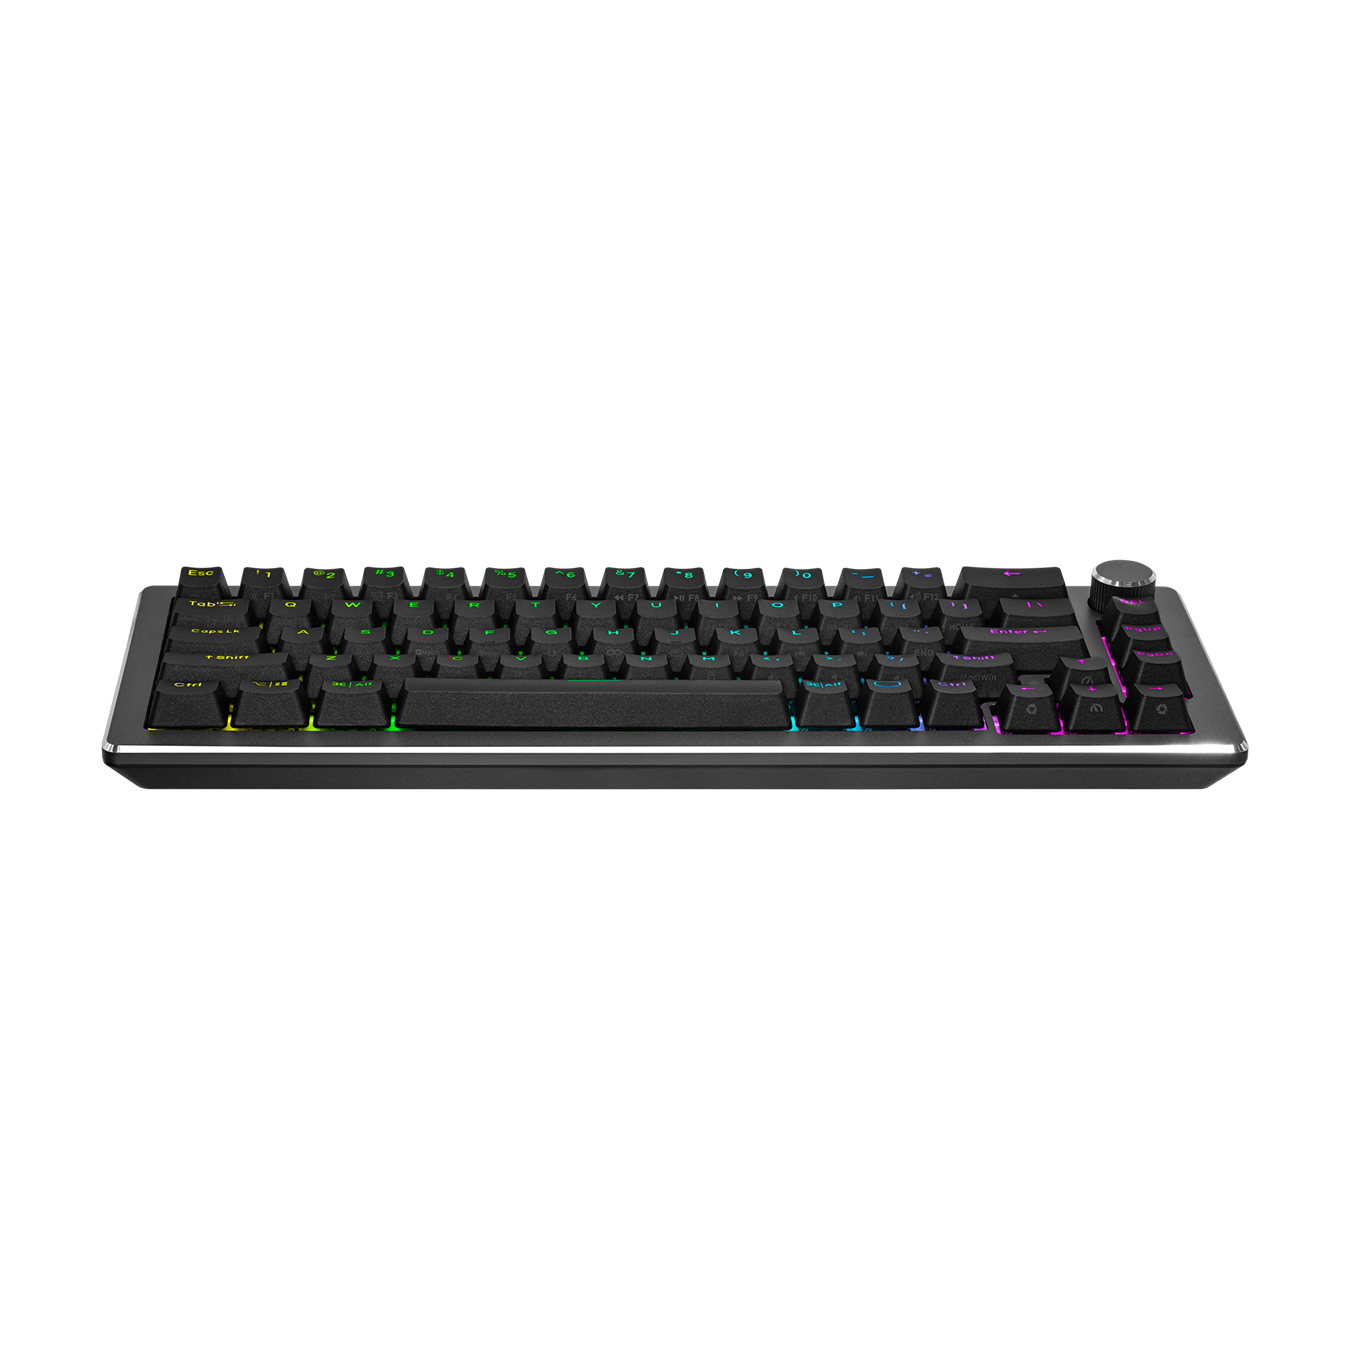 COOLER MASTER CK720 HOT-SWAPPABLE 65% SPACE GRAY KEYBOARD-BROWN SWITCH